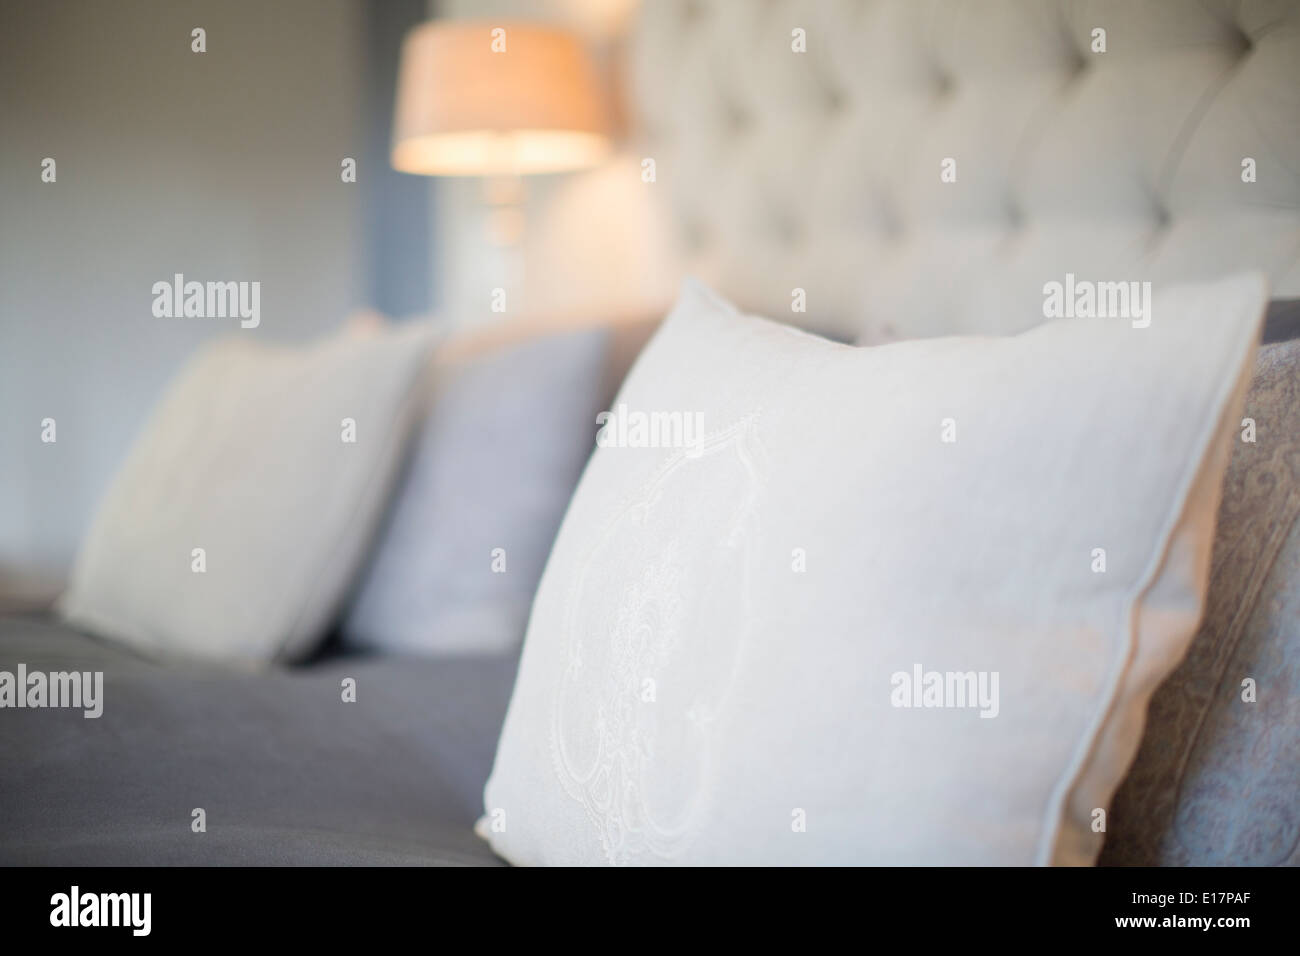 Pillows on bed in luxury bedroom Stock Photo